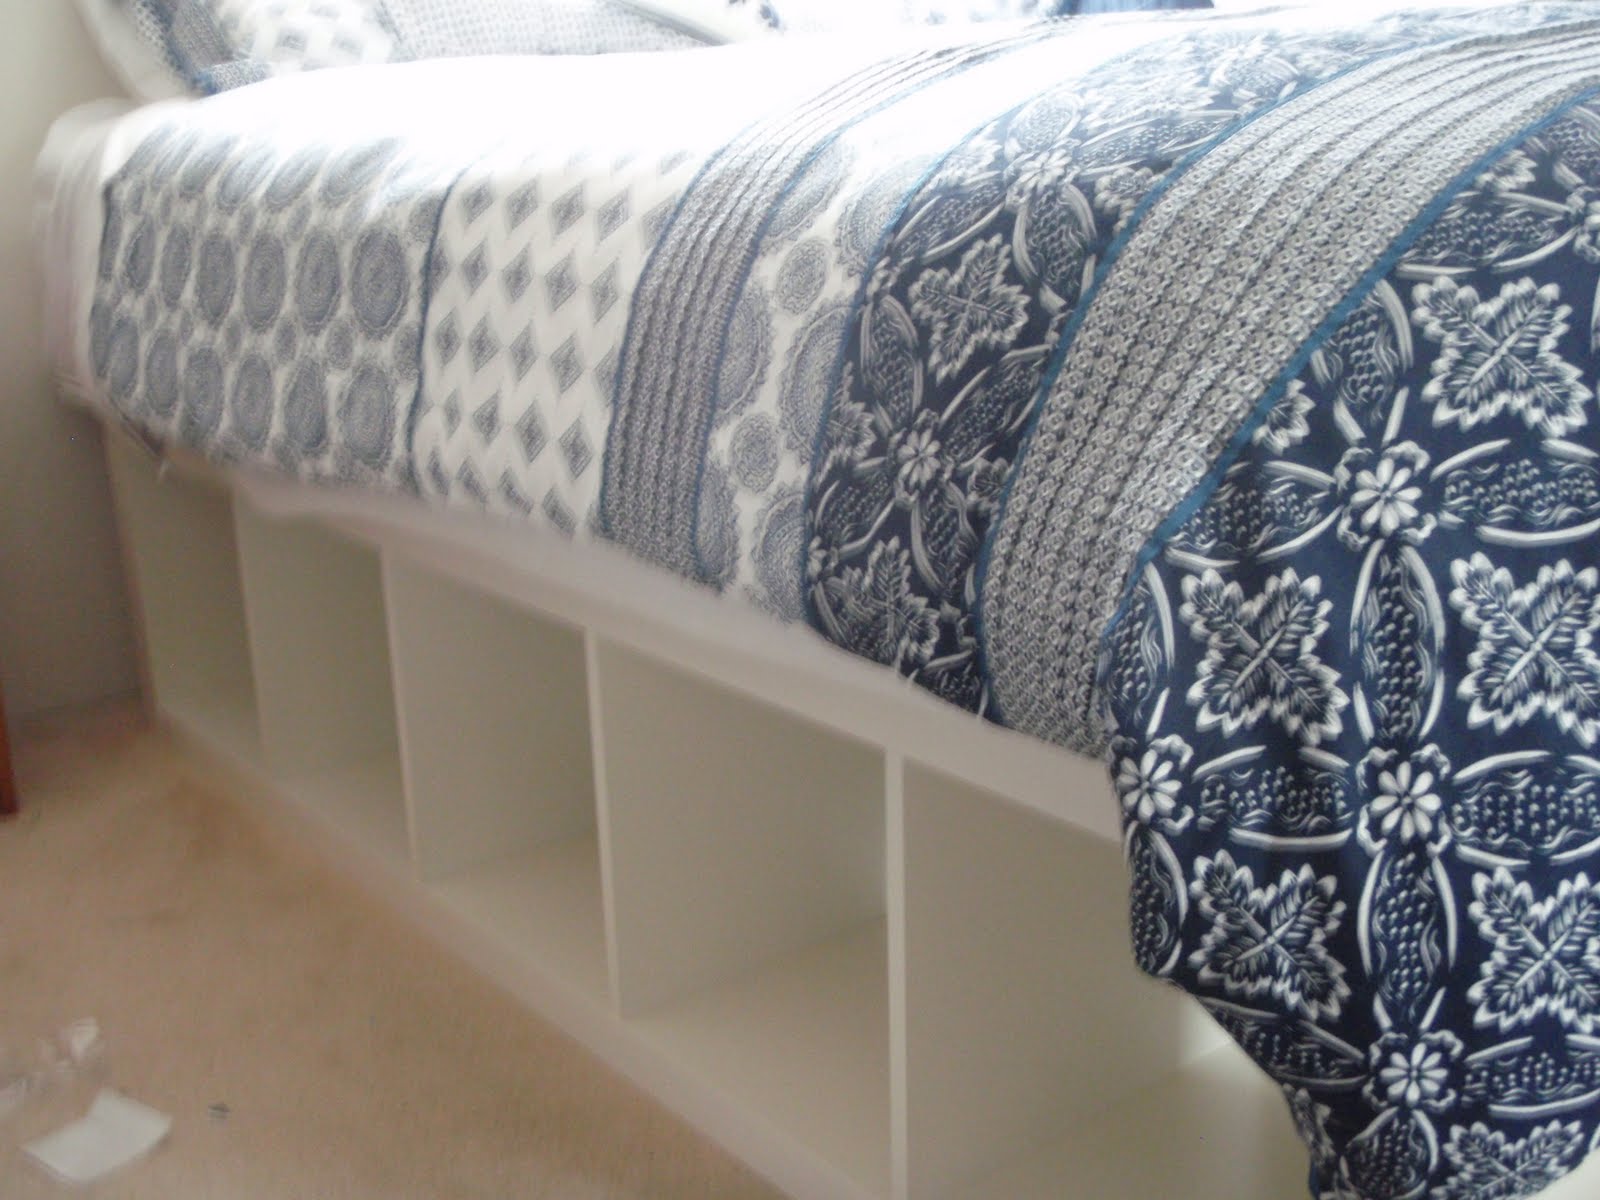 Expedit re purposed as bed frame for maximum storage